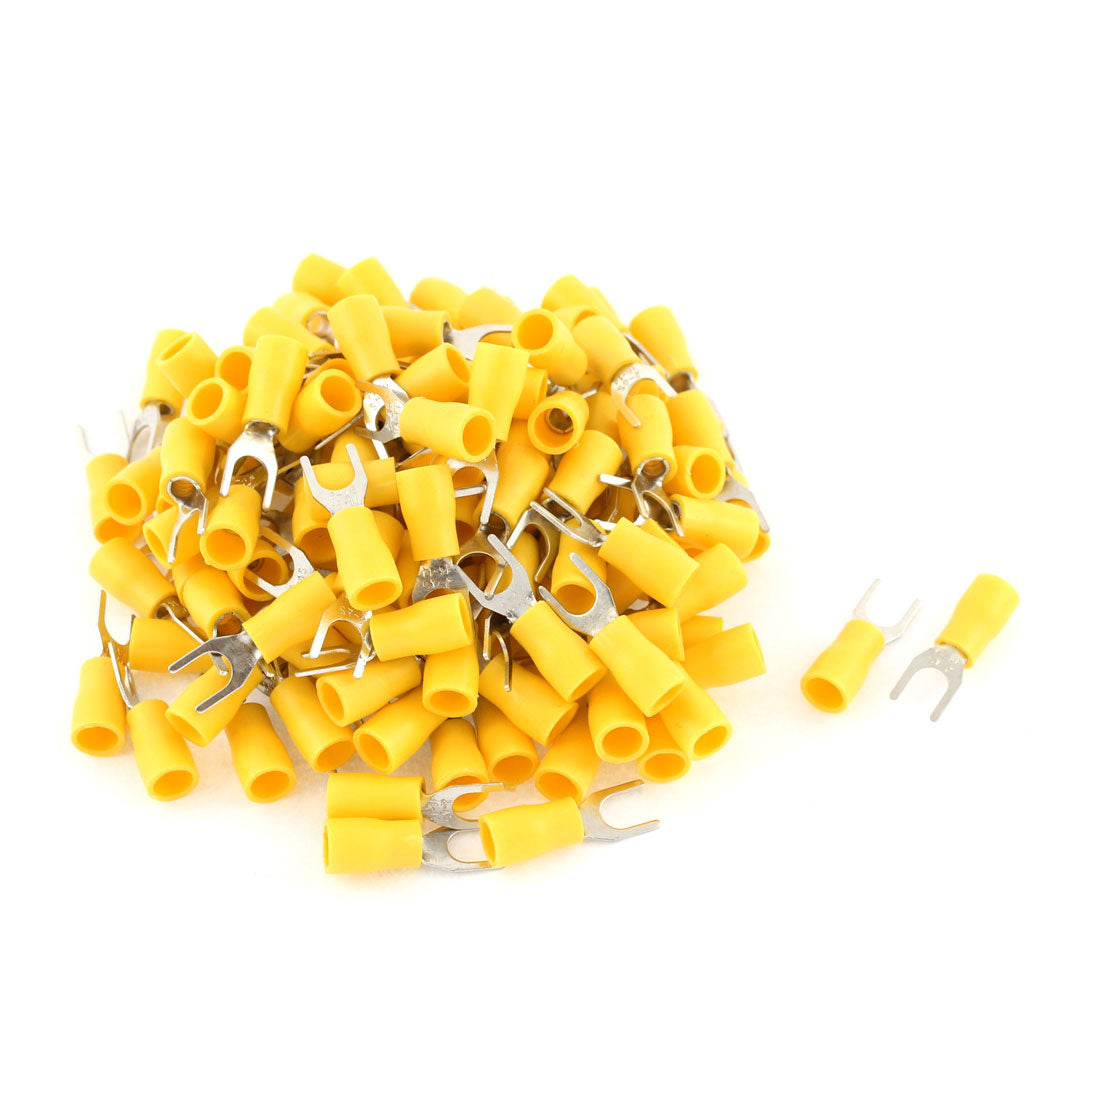 uxcell Uxcell 135Pcs SV2-4 Fork Type Yellow Insulated Spade Cable Terminals 16-14AWG